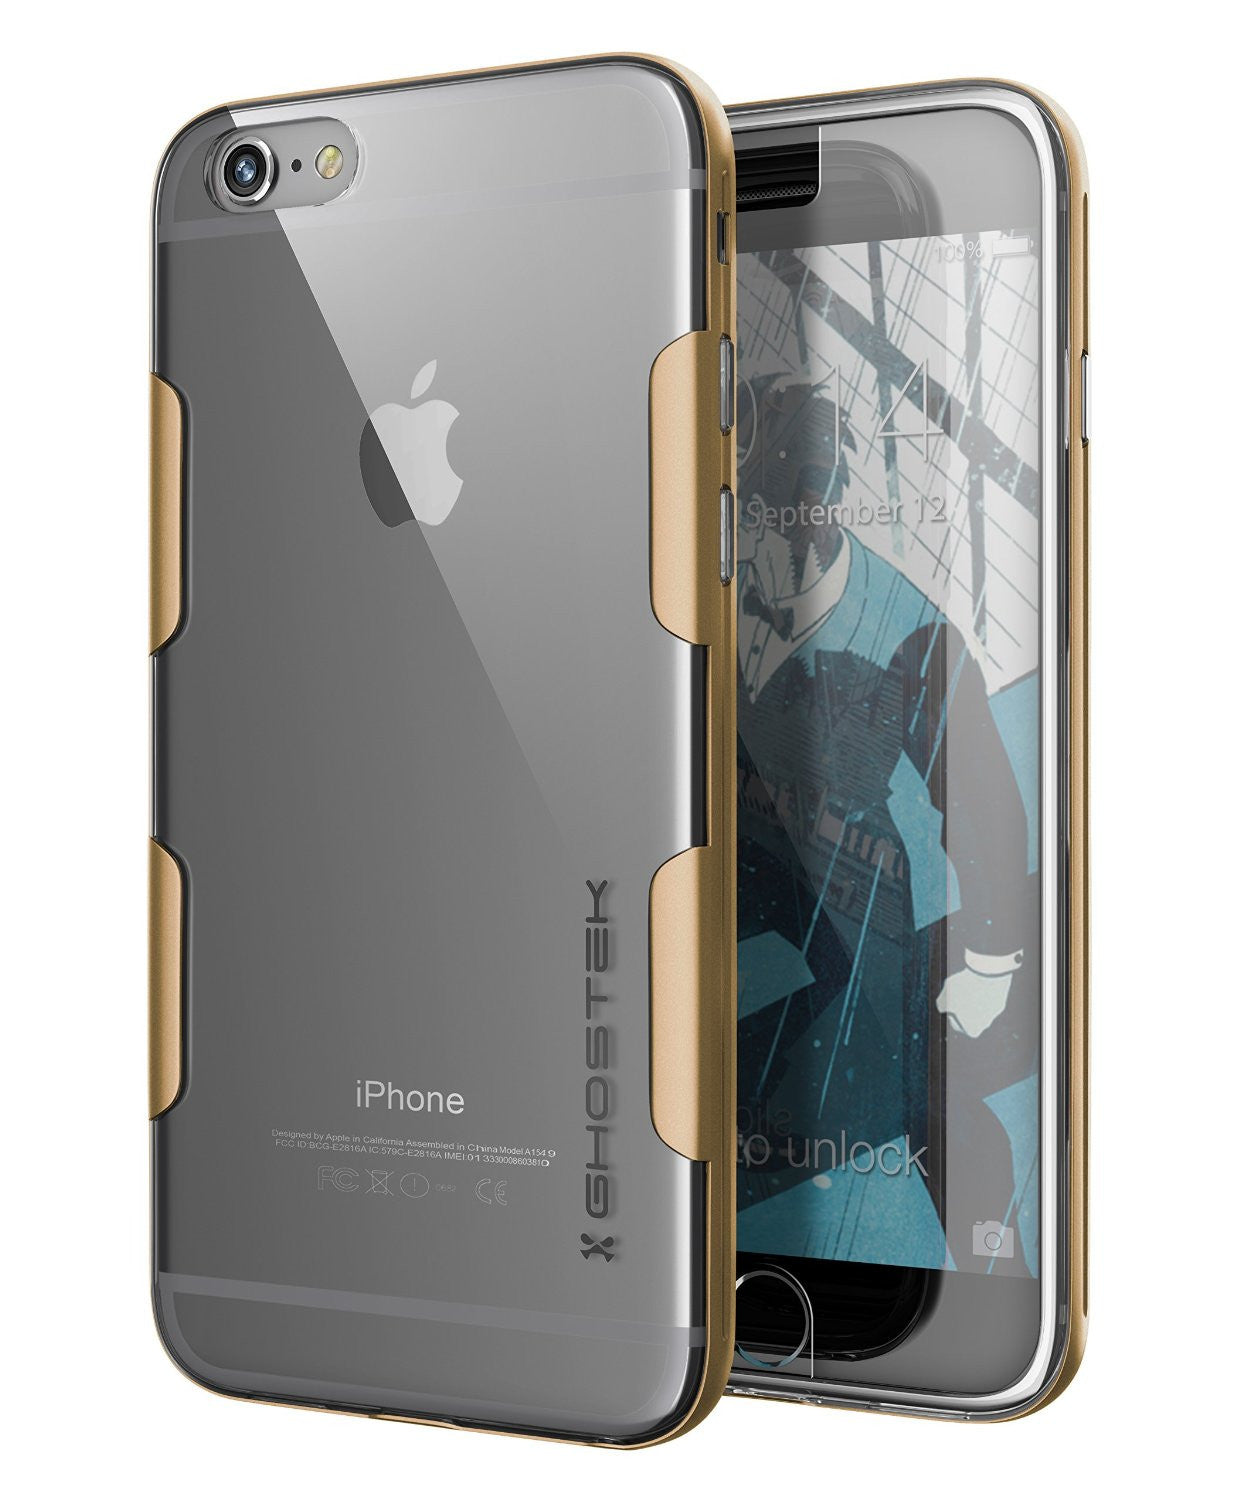 iPhone 6s Plus Case Gold Ghostek Cloak, Slim Protective Armor w/ Tempered Glass | Lifetime Warranty (Color in image: gold)